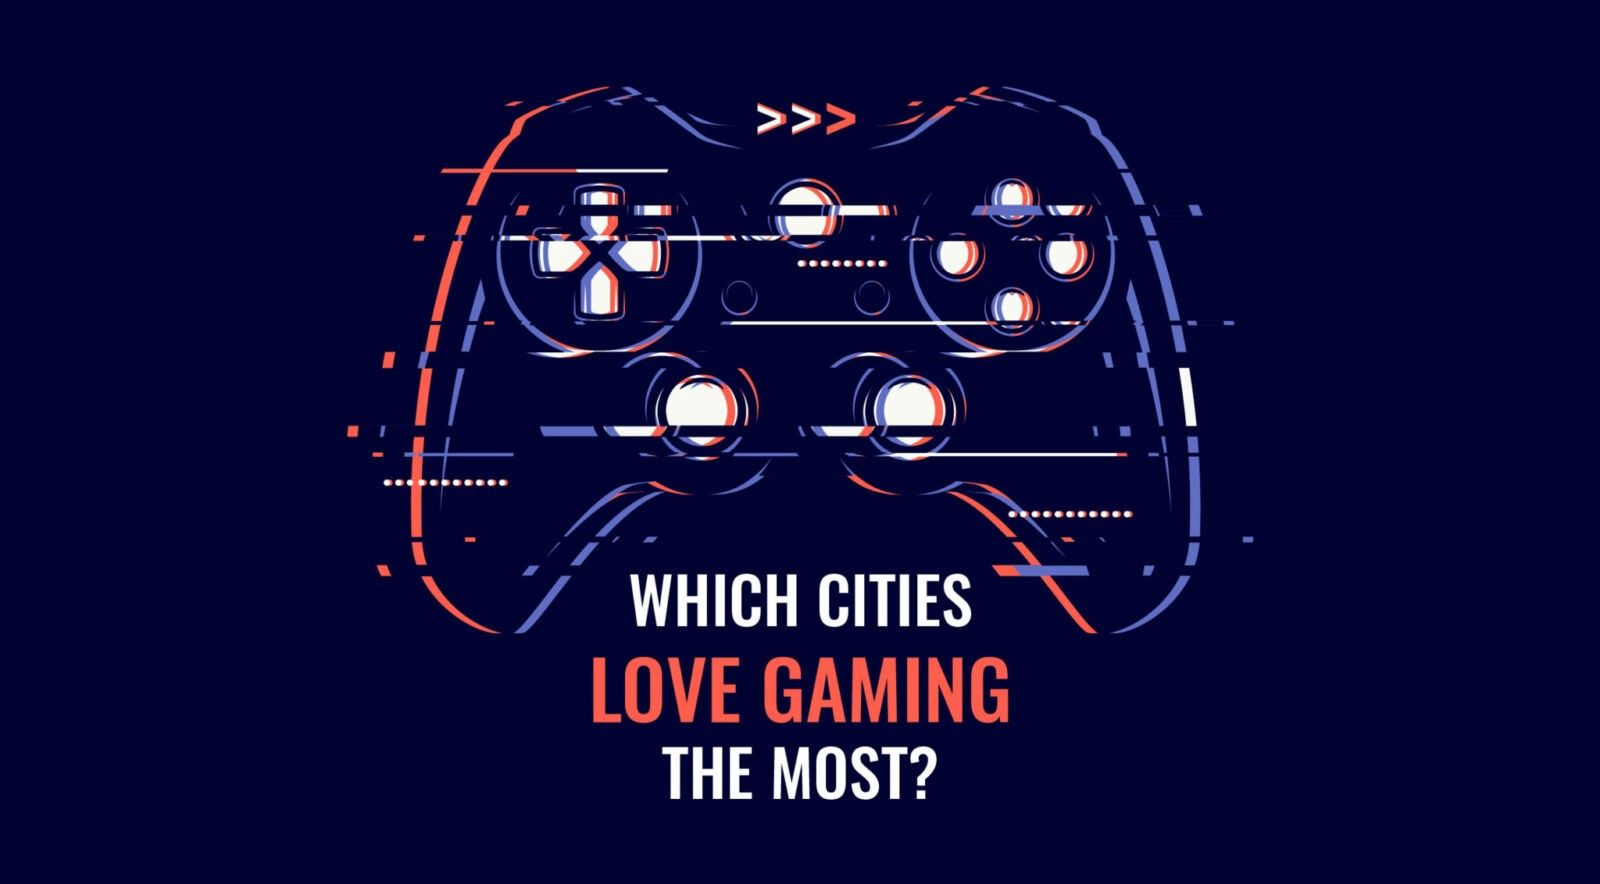 Which Cities Love Gaming the Most - The Final Results